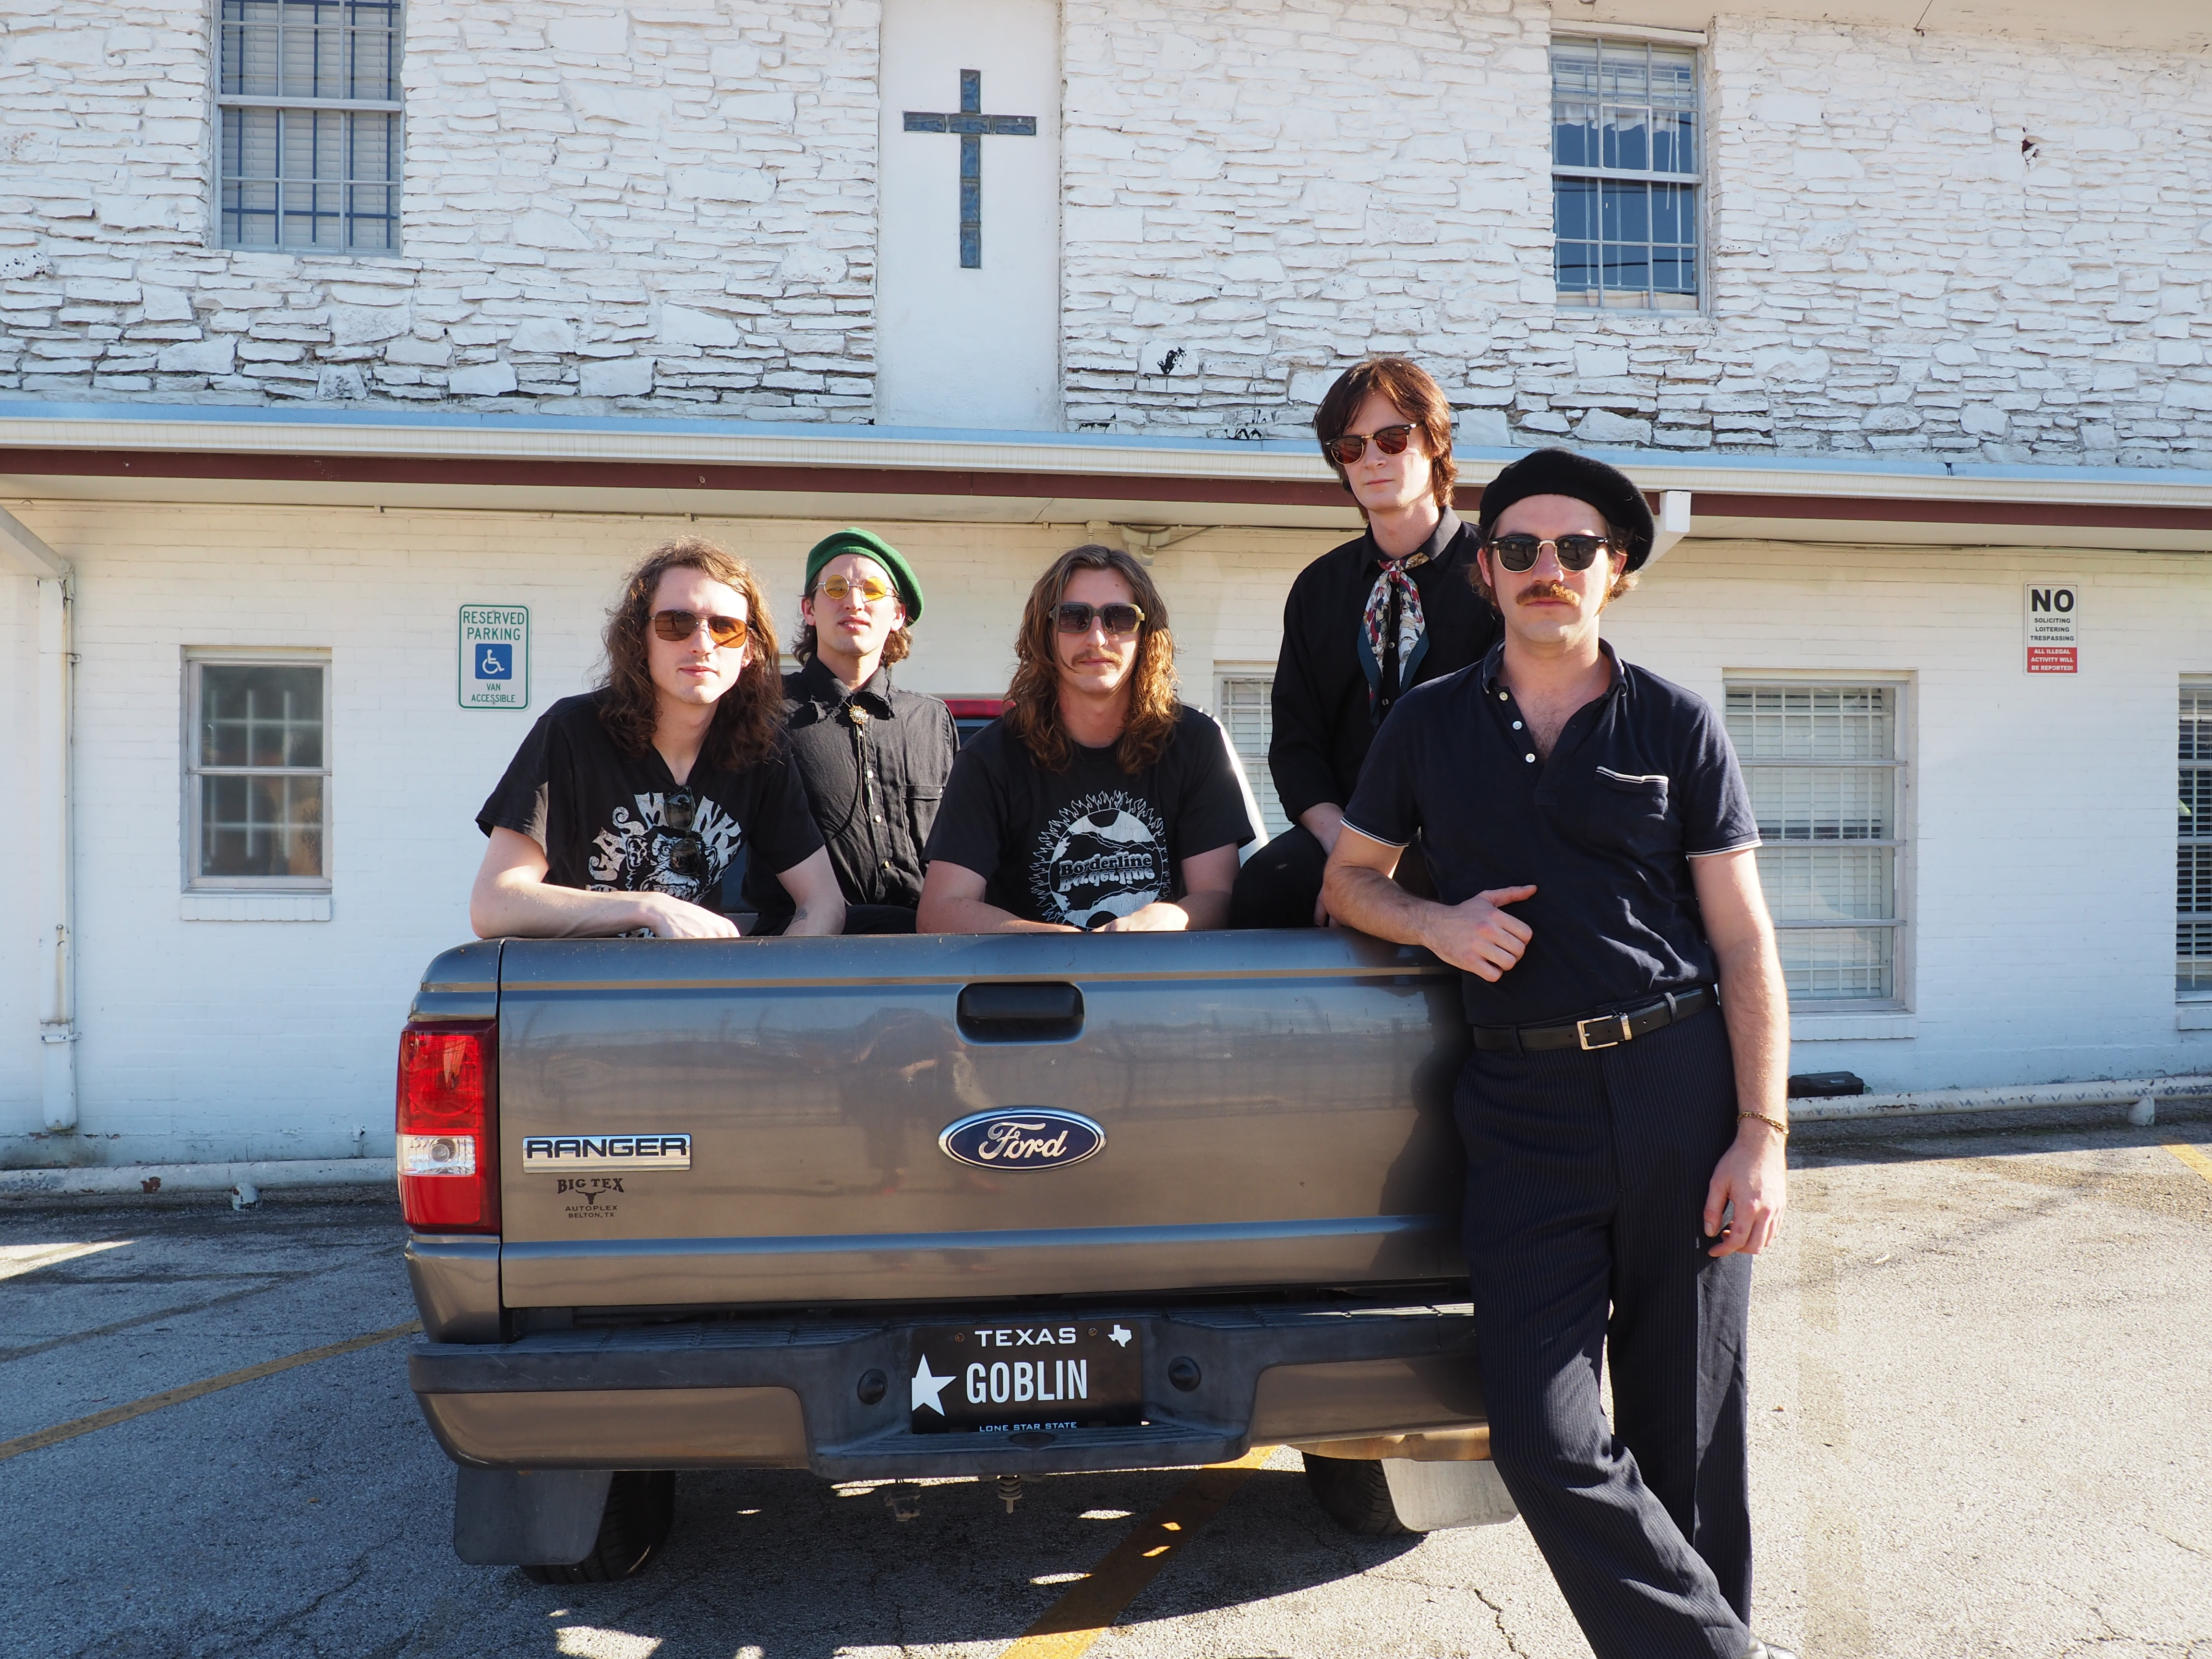 Five people sitting in the back of a pickup truck dressed in black